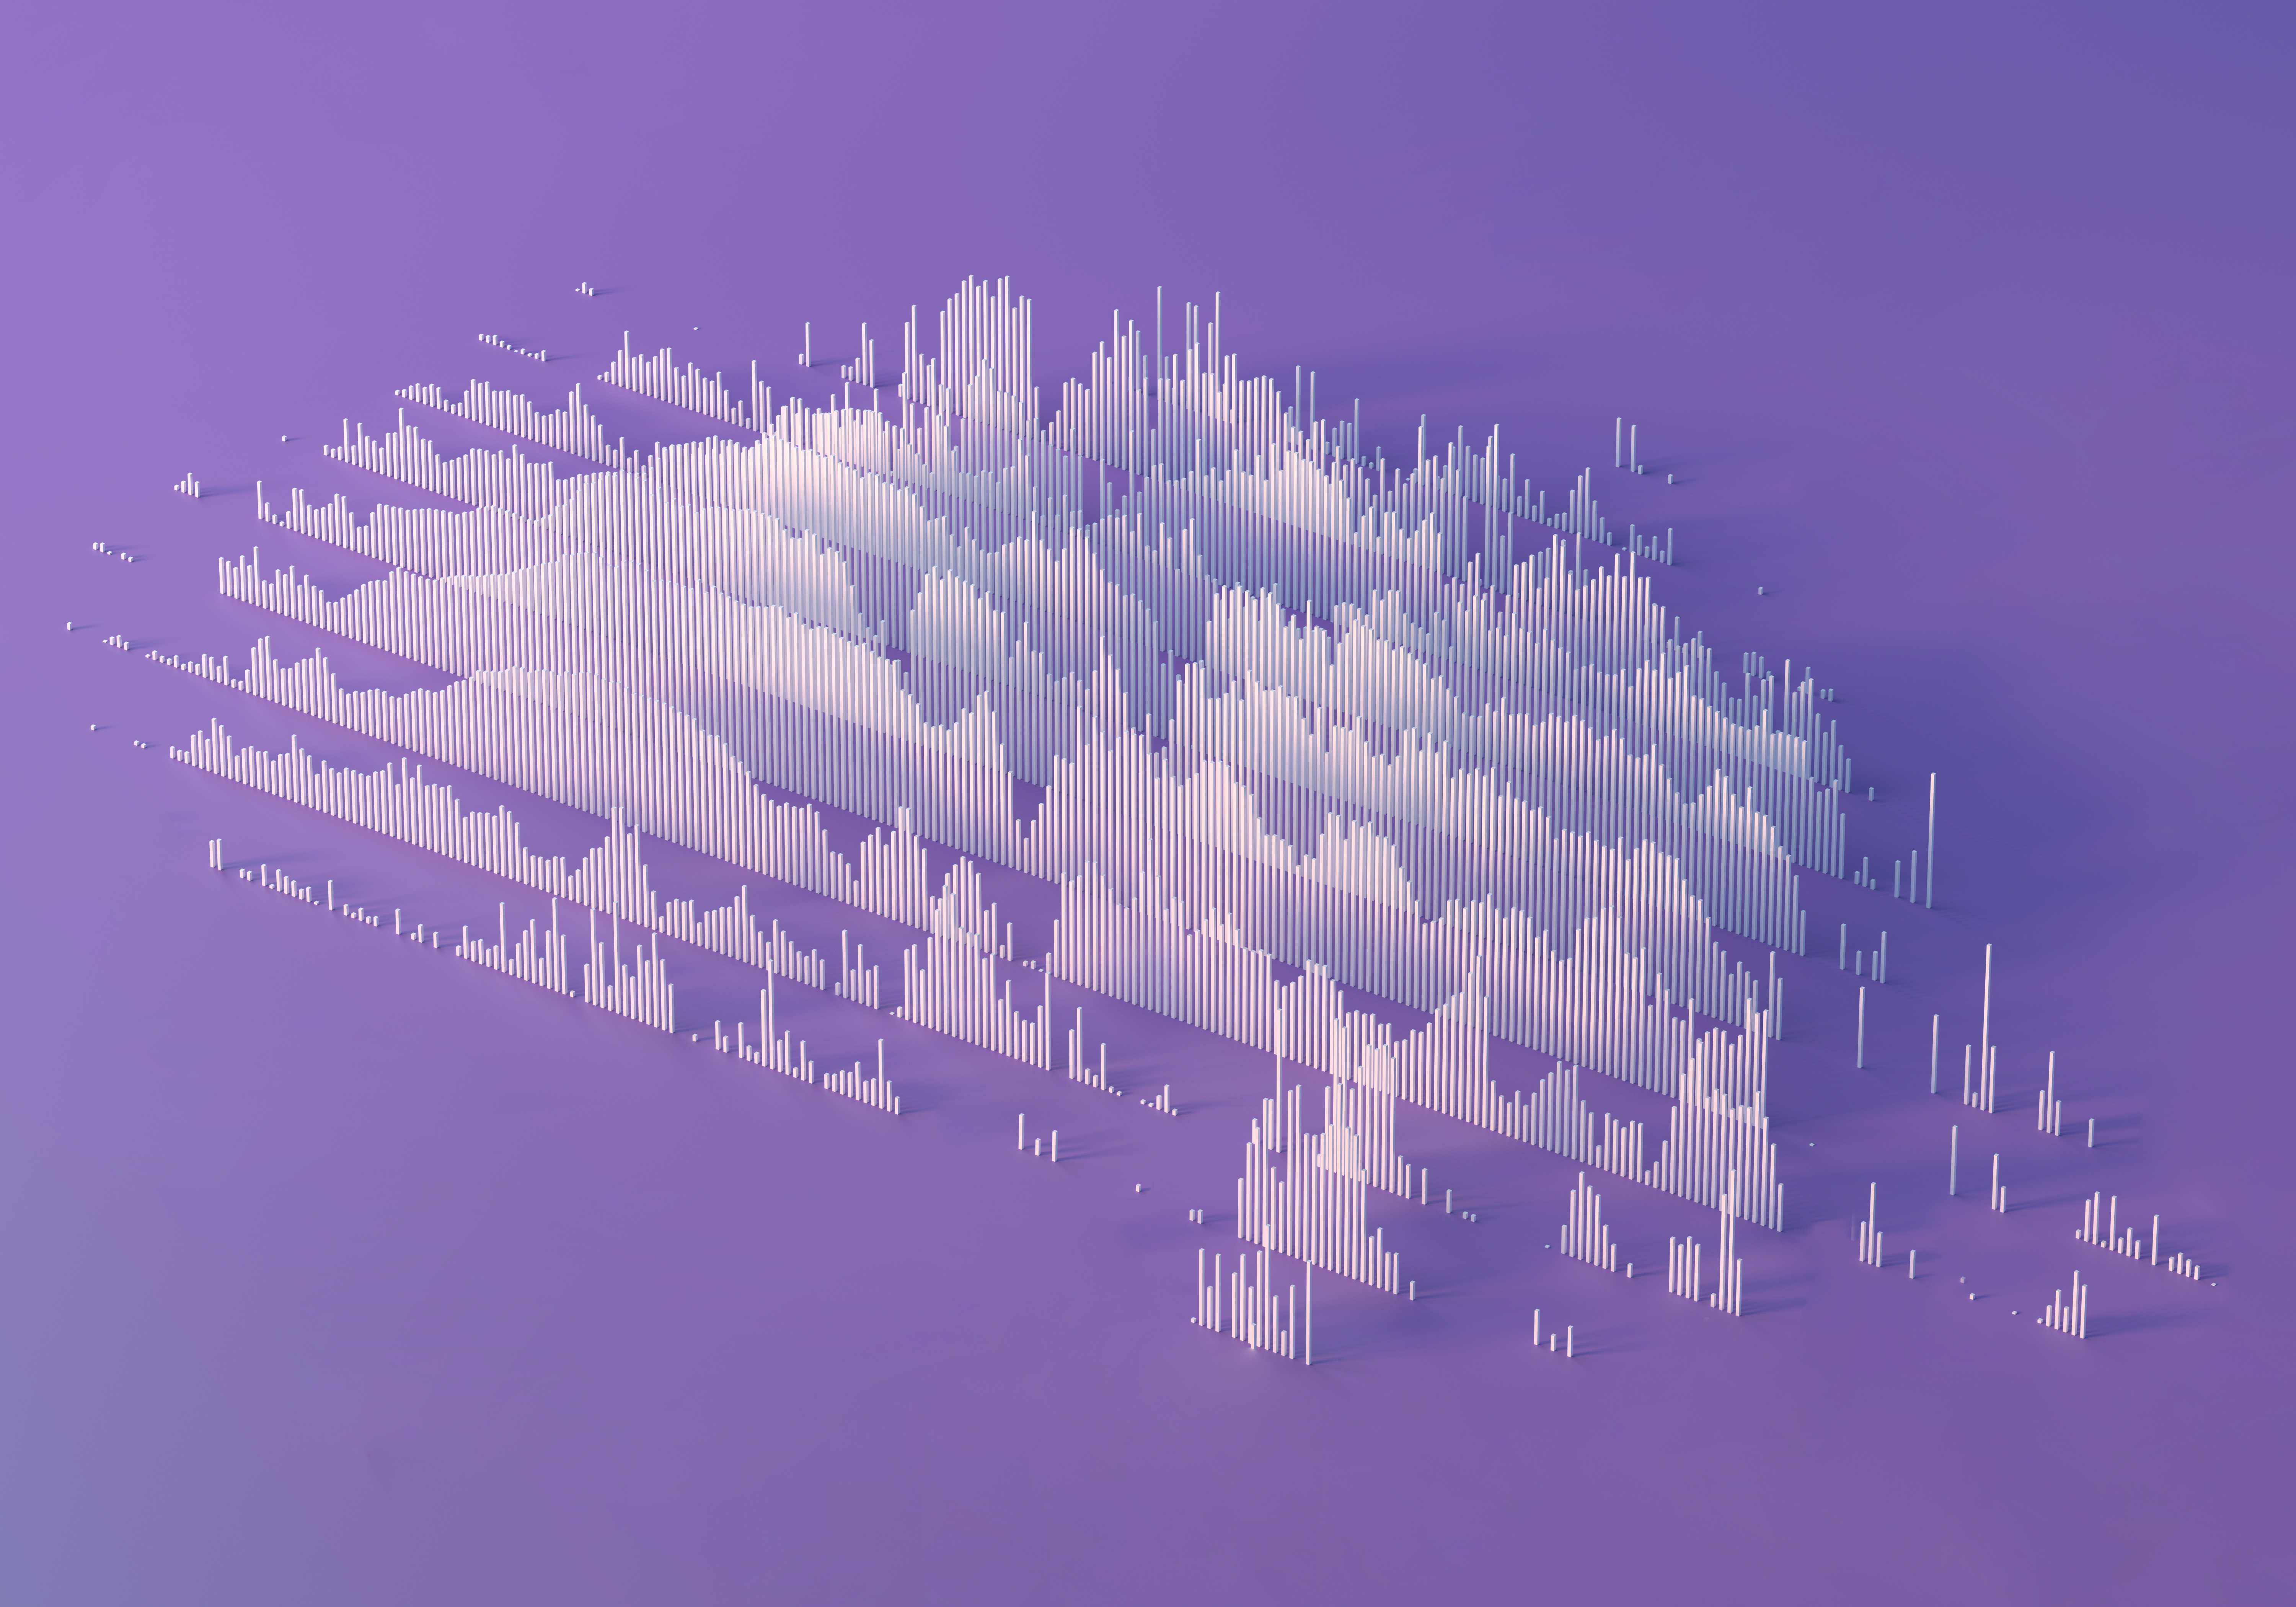 Image of abstract data visualization on purple background.